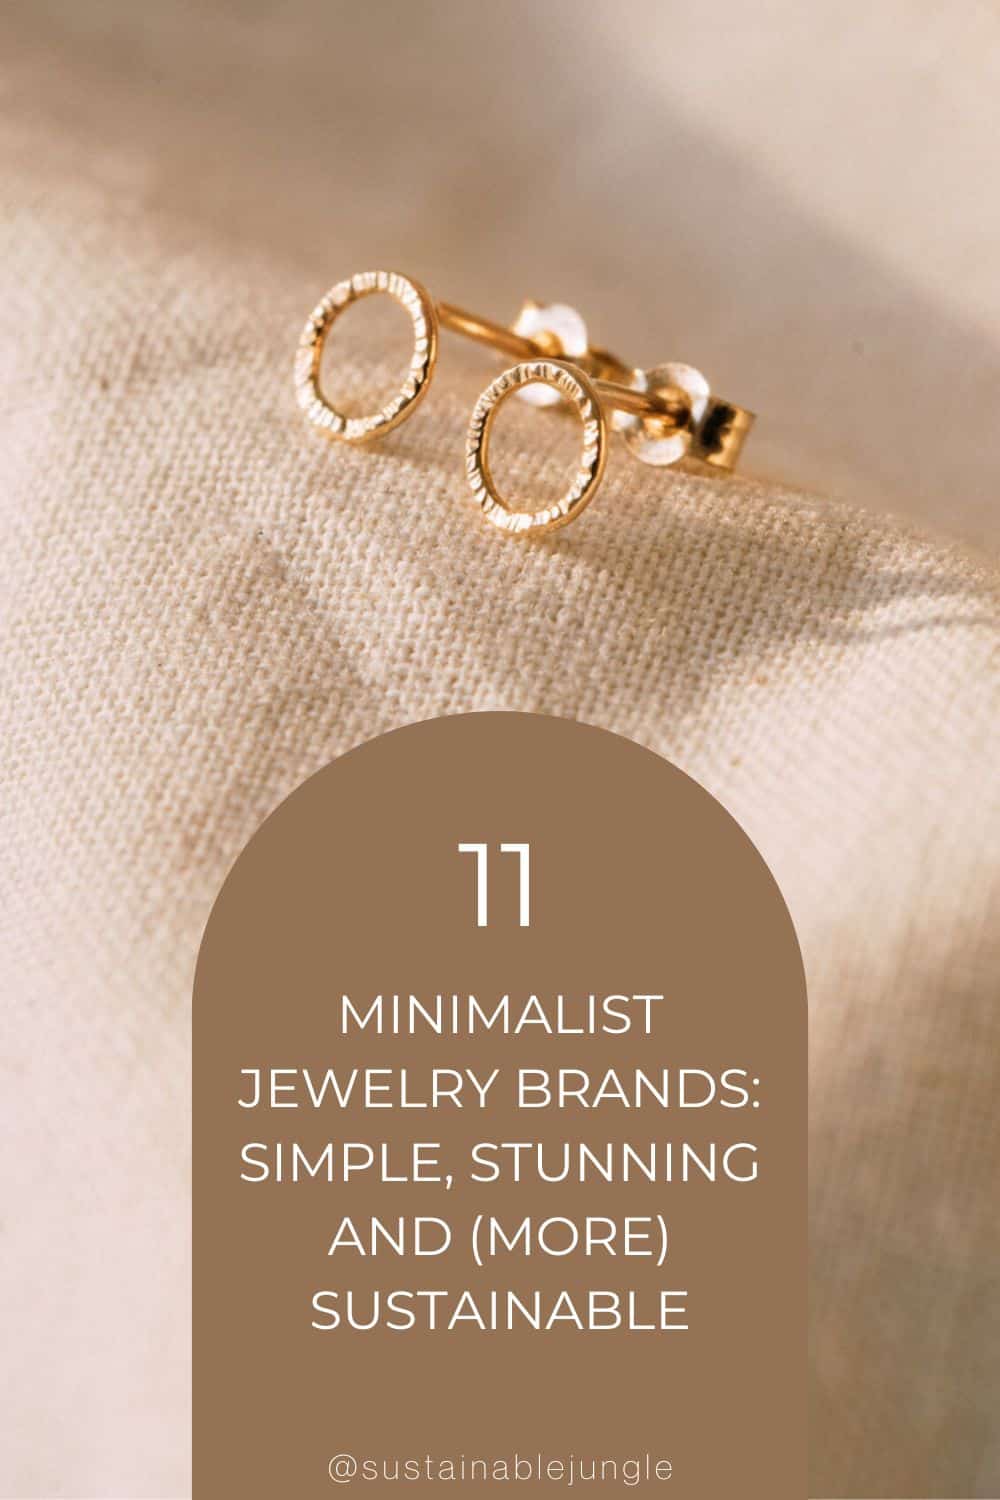 11 Minimalist Jewelry Brands: Simple, Stunning and (More) Sustainable Images by Atypical Thing #minimalistjewelry #sustainablejungle